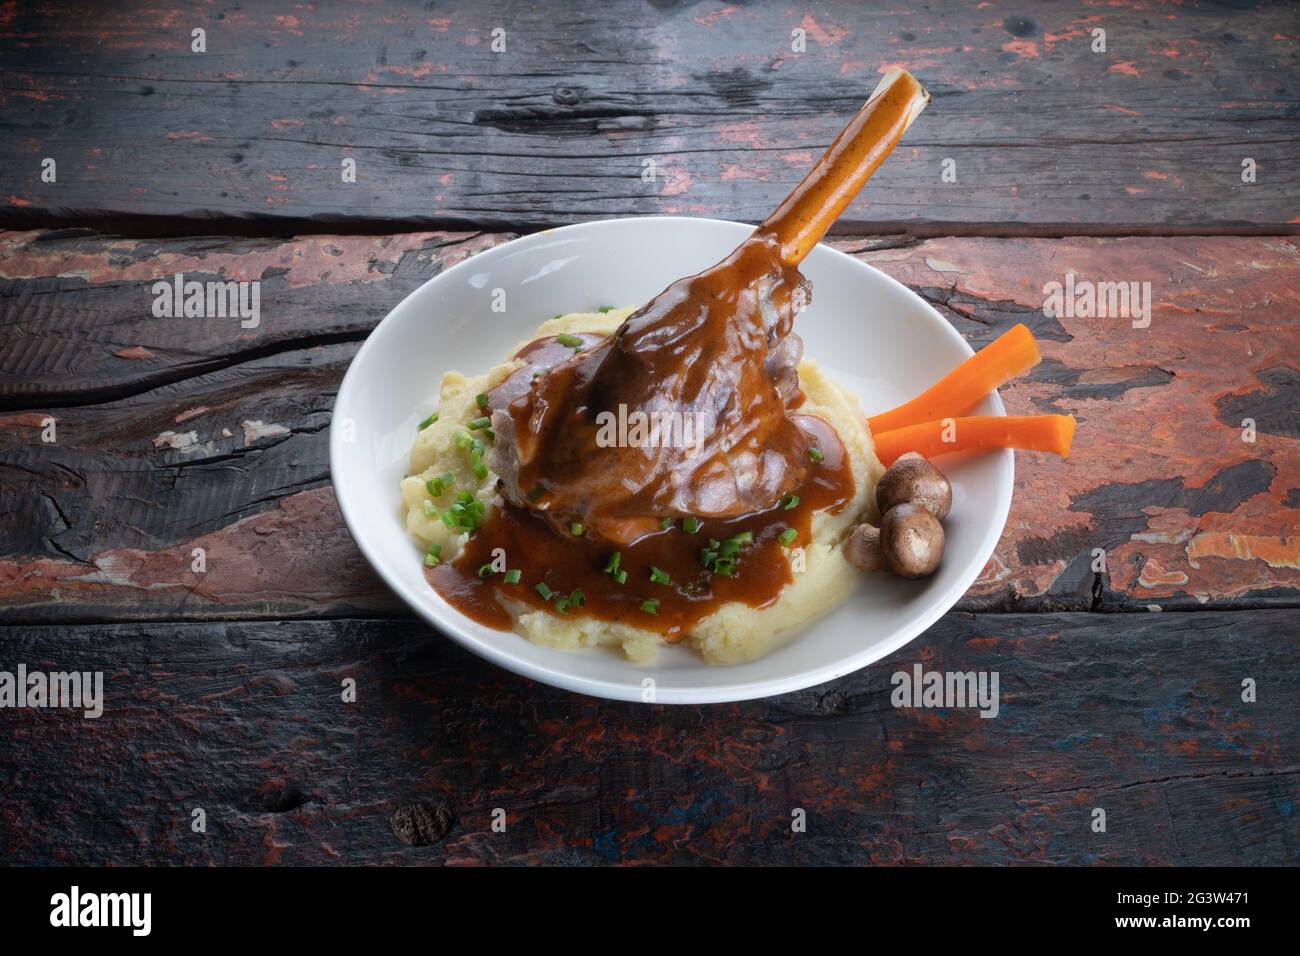 Turkish lamb shank in dark sauce with potato puree and vegetables on rustic wooden table Stock Photo